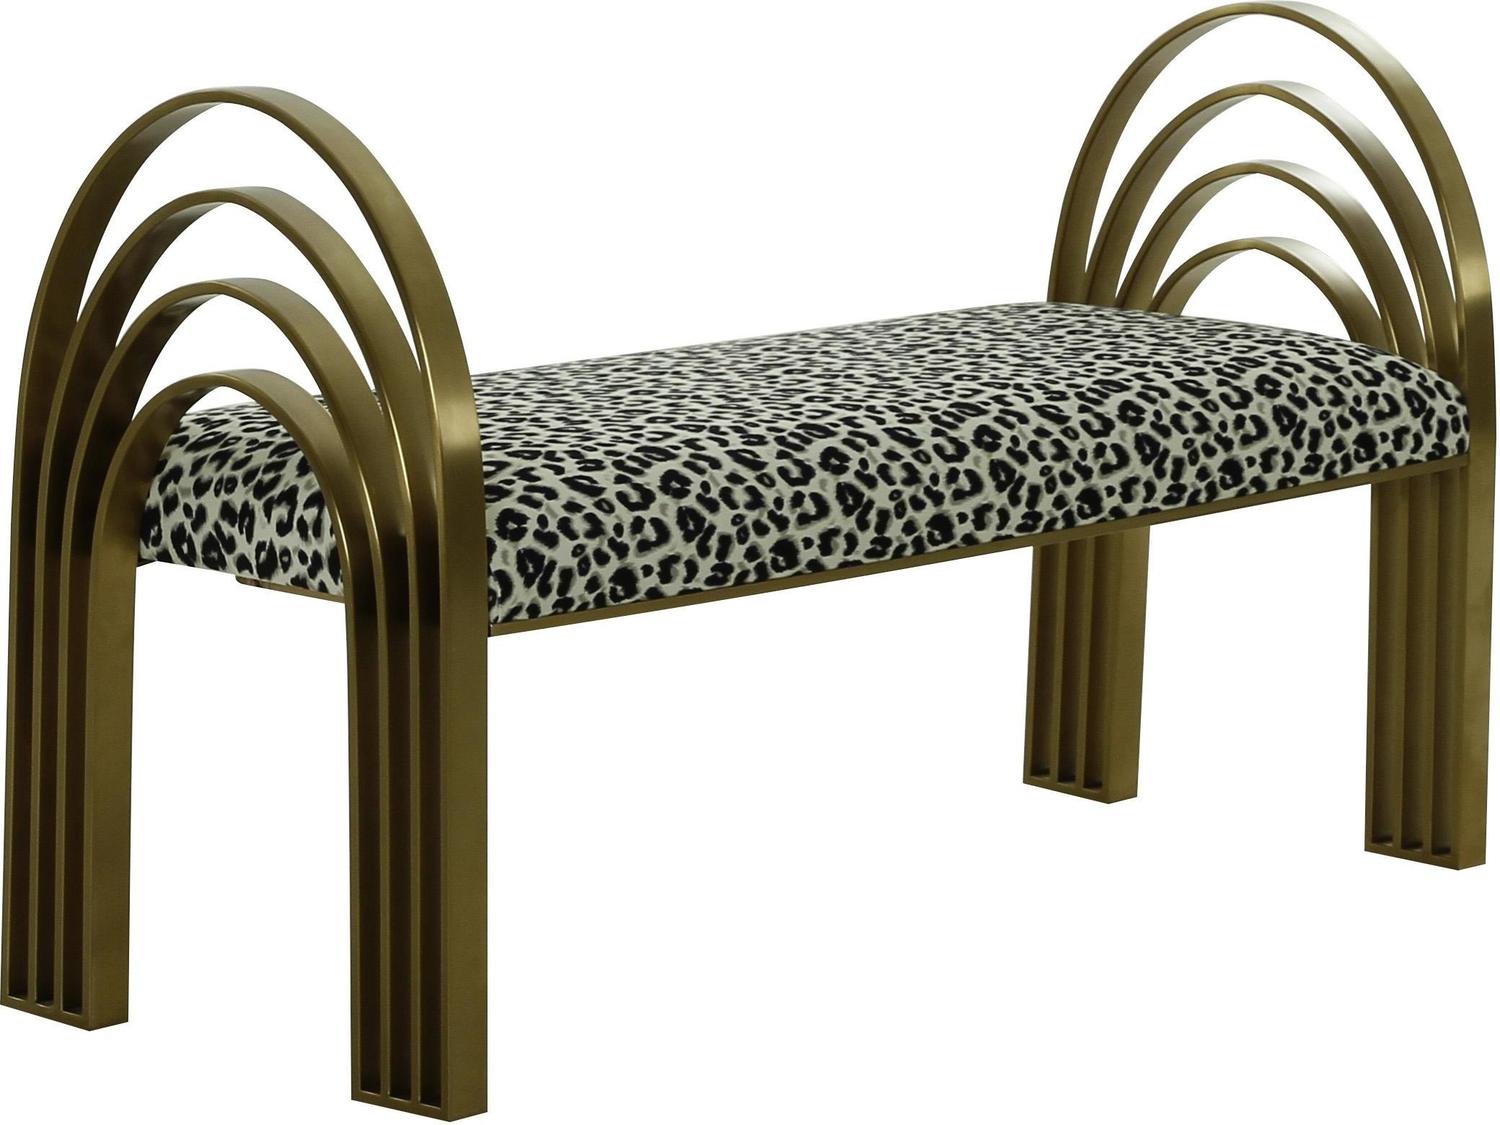 red velvet bench Contemporary Design Furniture Benches Leopard